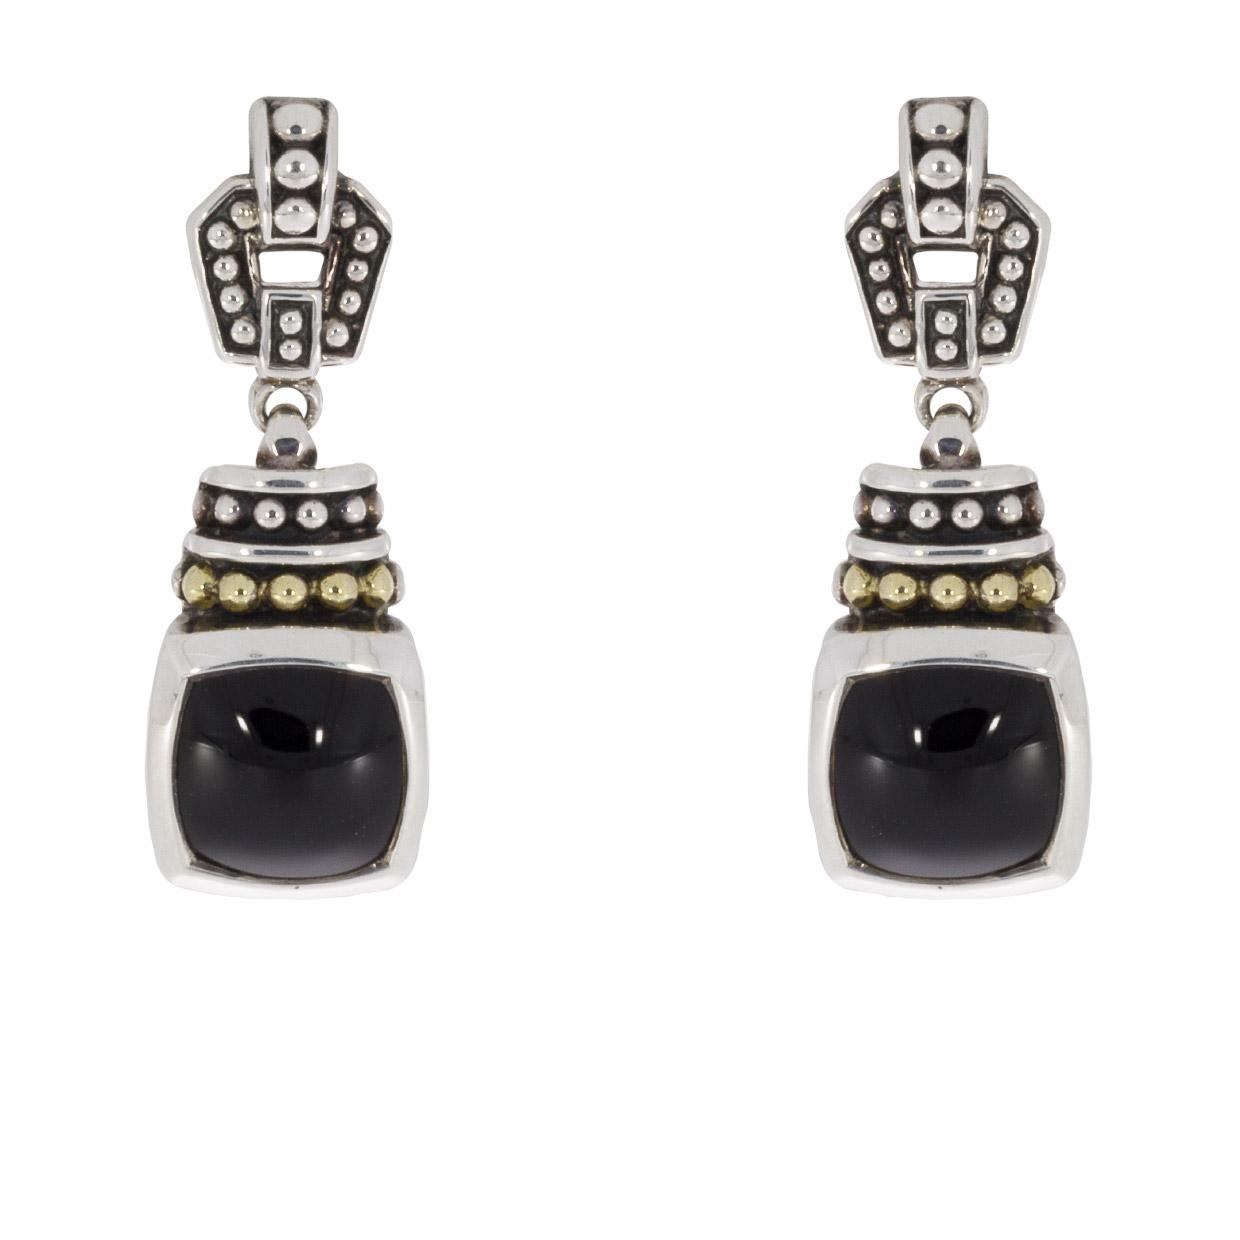 Item Details

Main Stone Shape Cabochon
Main Stone Treatment Not Enhanced
Main Stone Creation Natural
Main Stone Onyx
Main Stone Color Black
Estimated Retail $495.00
Brand Lagos
Collection Caviar Color
Metal Gold & Silver
Style Drop/Dangle
Fastening